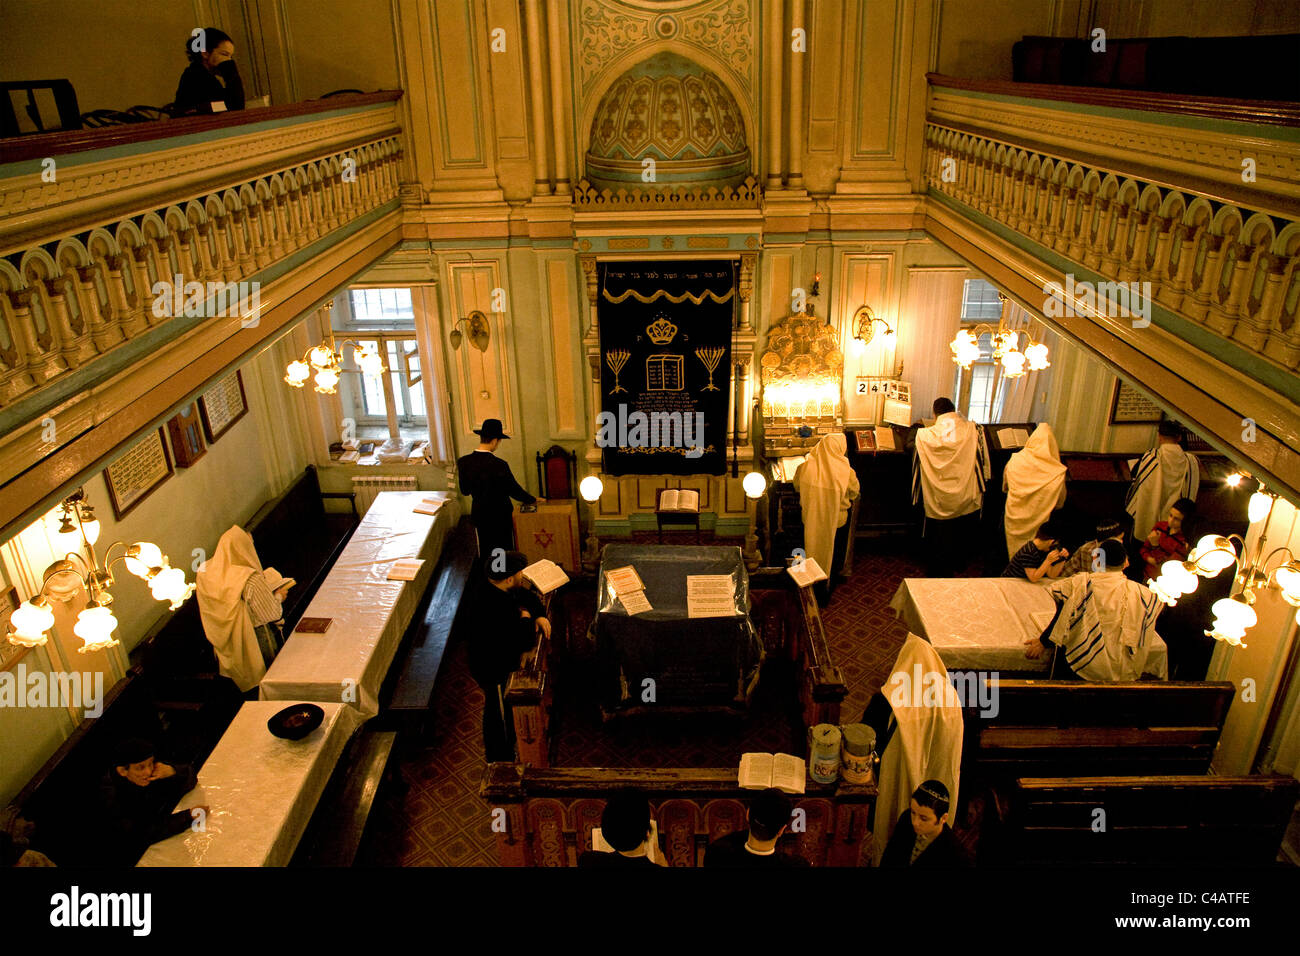 Russia, St.Petersburg; During a religious ceremony in the main old Synagogue in the historical centre Stock Photo